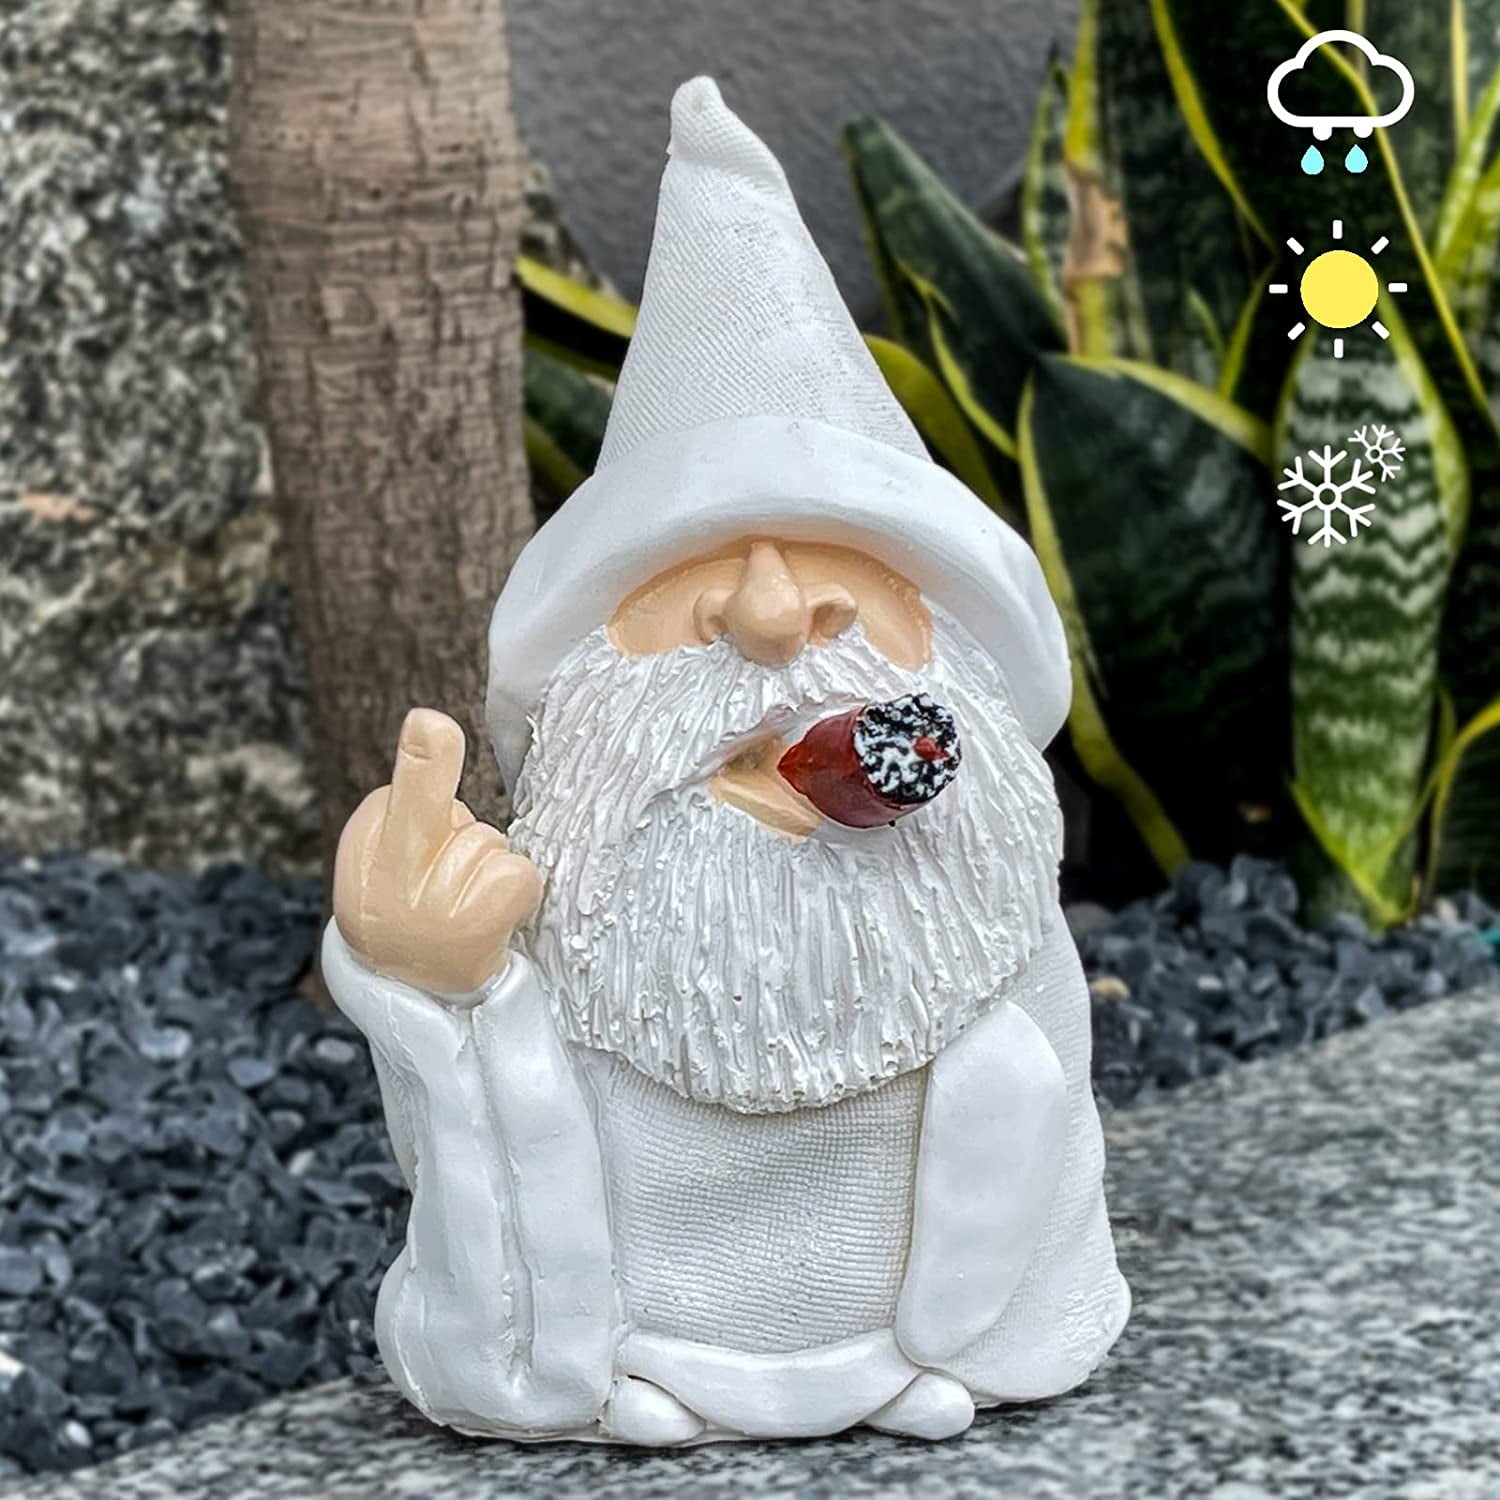 WIZARD GNOME MAN Statue Beautiful Highly Detailed Stone Garden Ornament Decor 